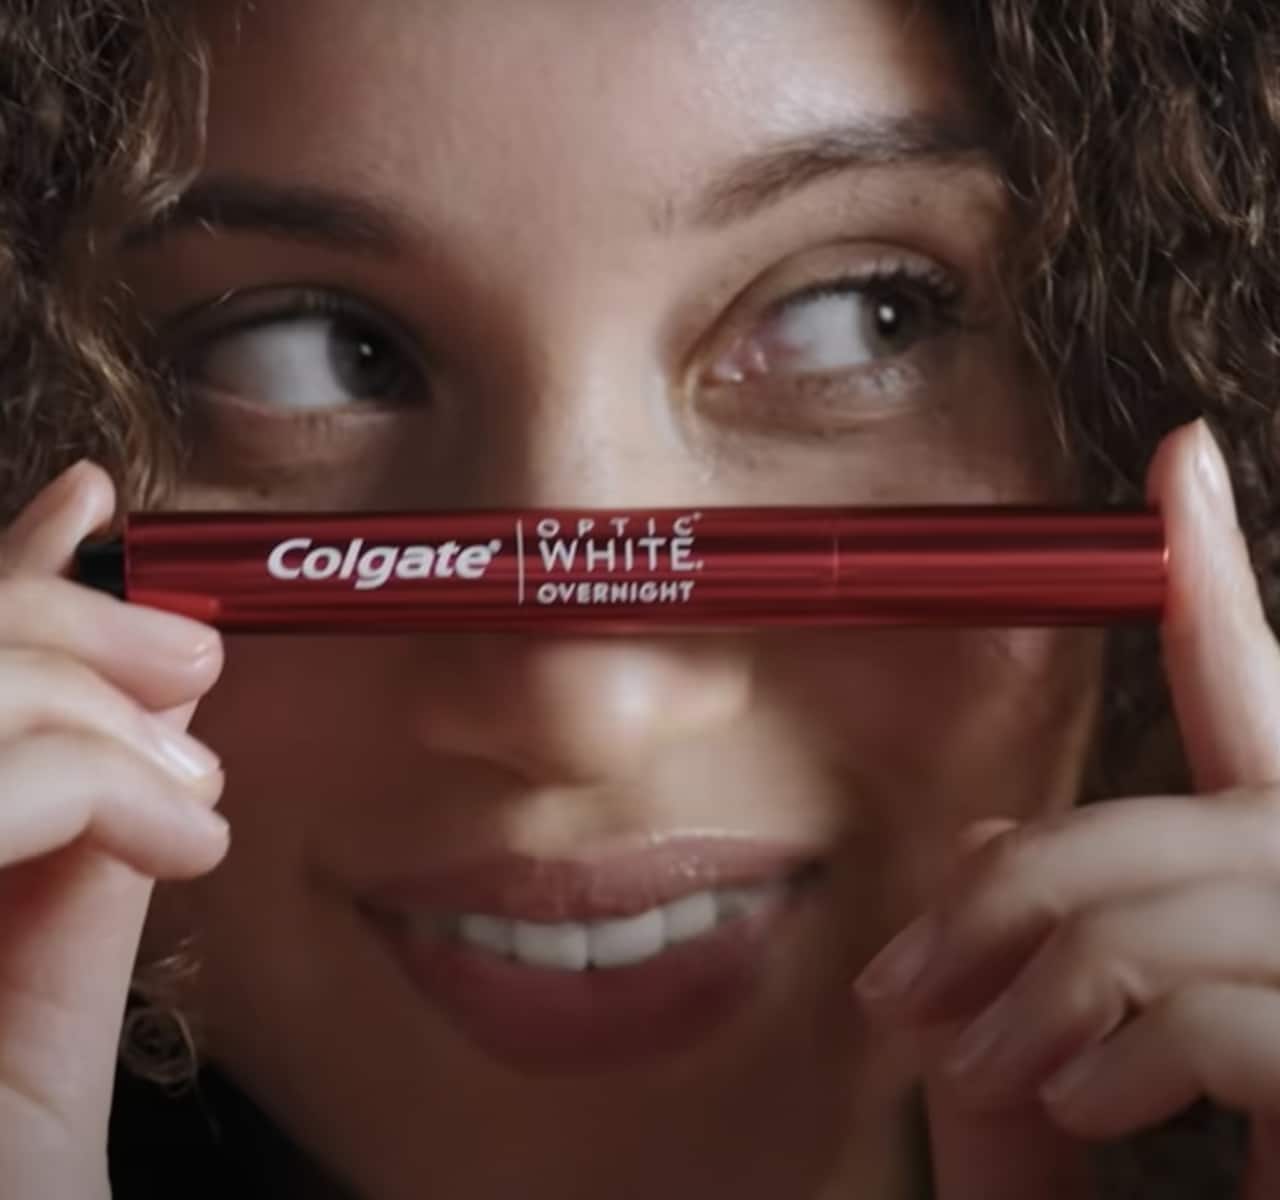 The 8 Best Teeth Whitening Pens of 2024, Tested and Reviewed